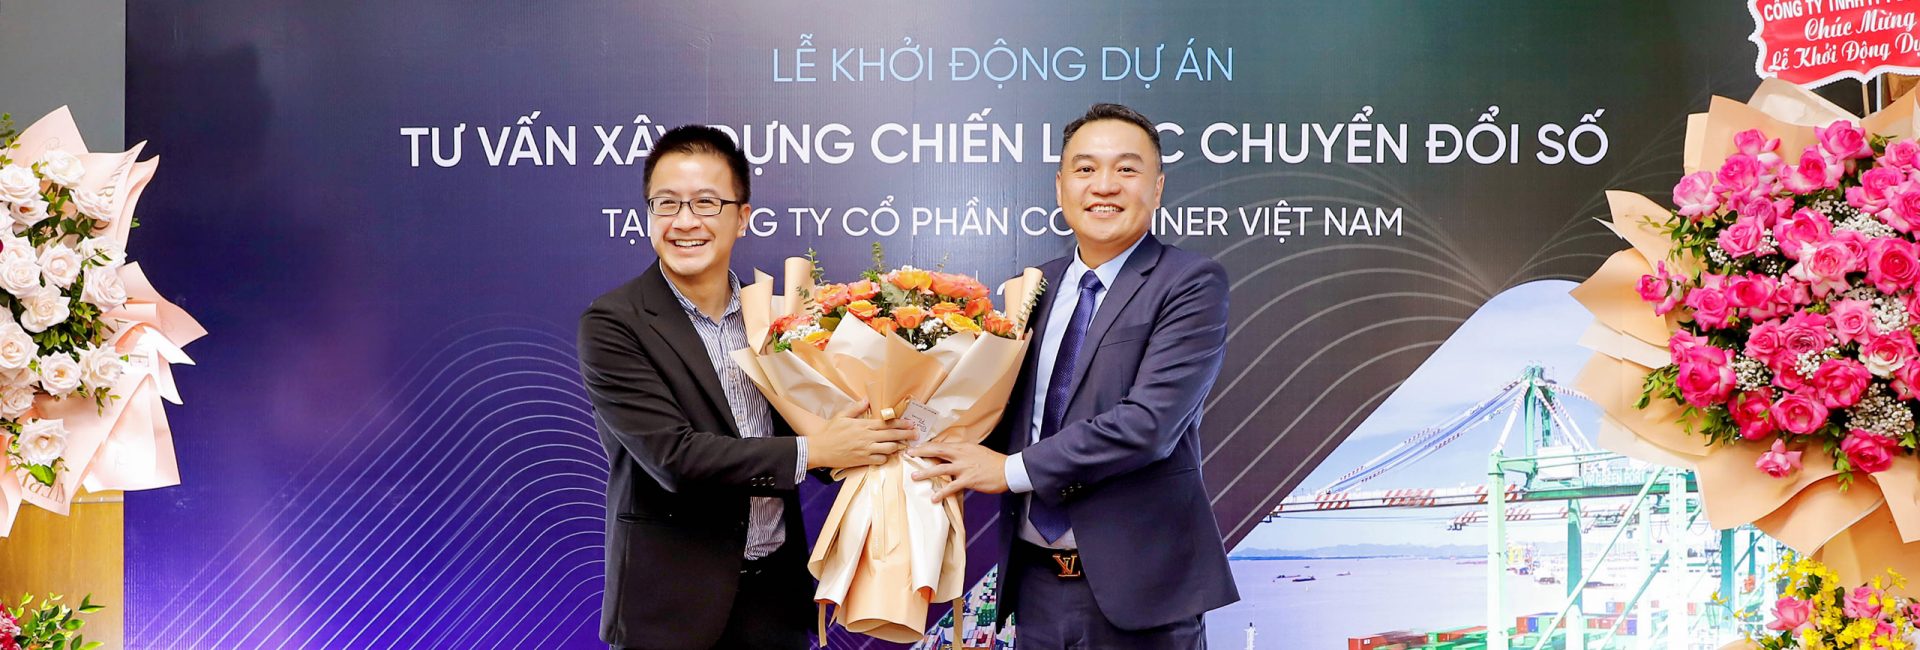 FPT Digital consults Vietnam Container Shipping Company in developing digital transformation strategy